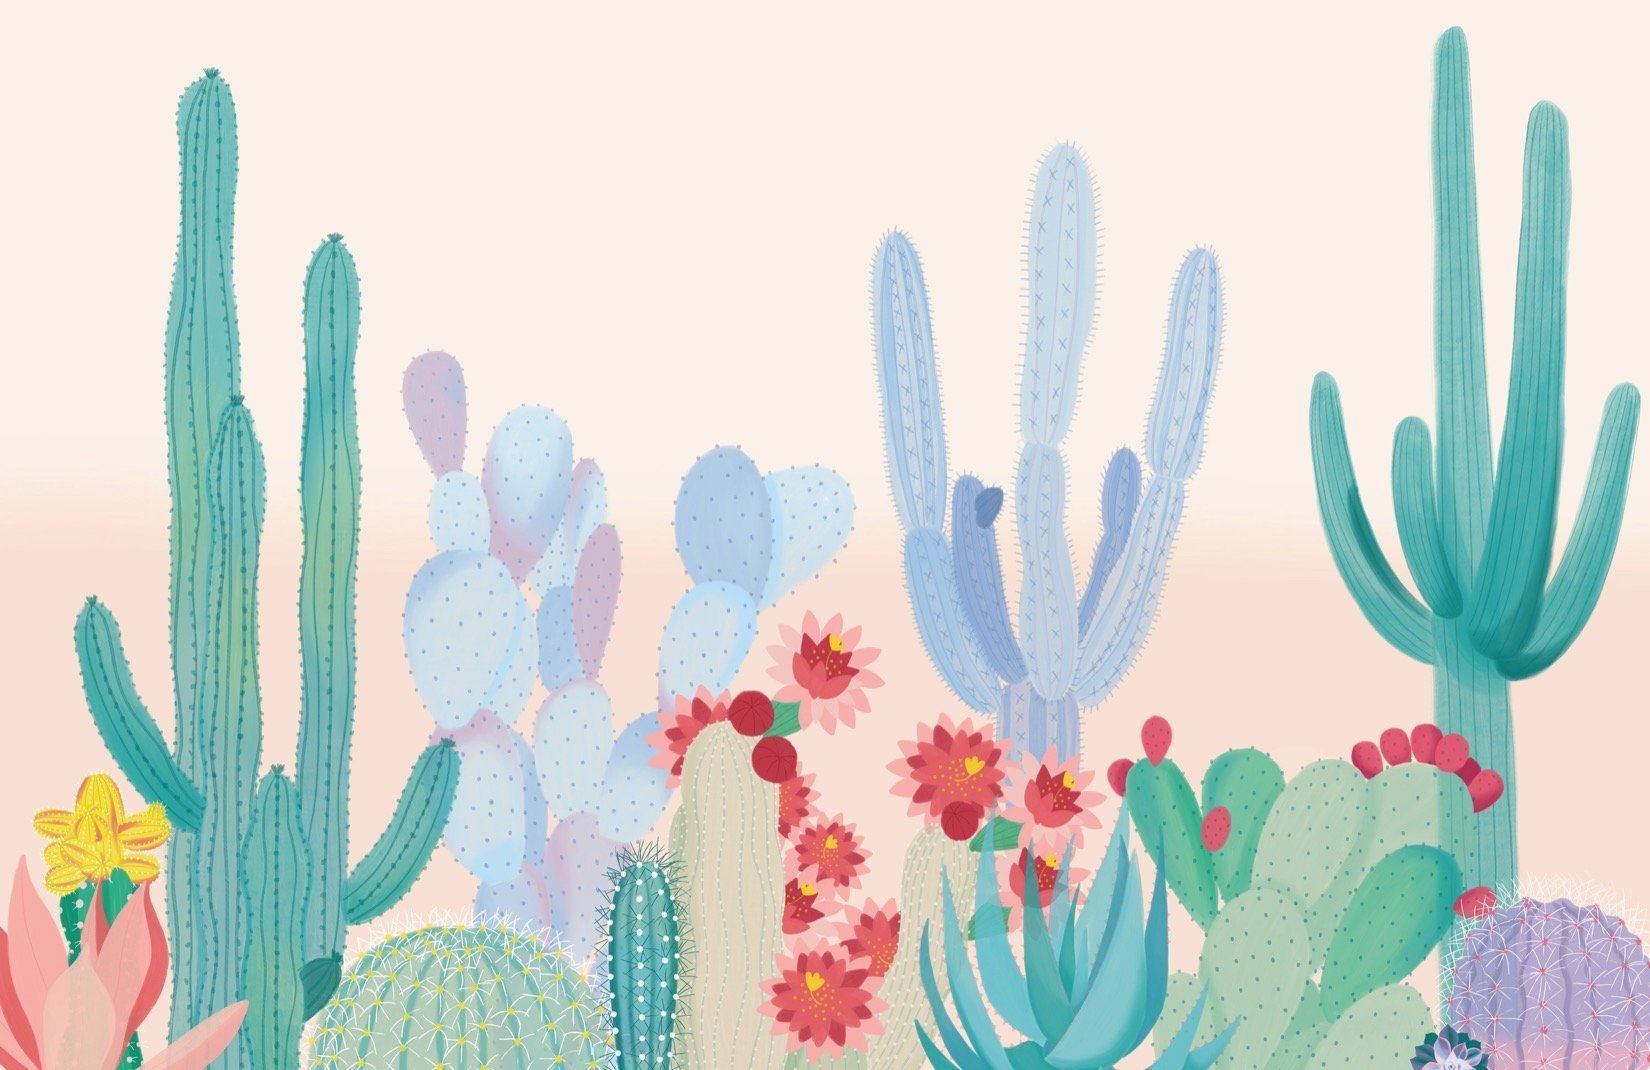 A cactus garden with flowers and other plants - Cactus